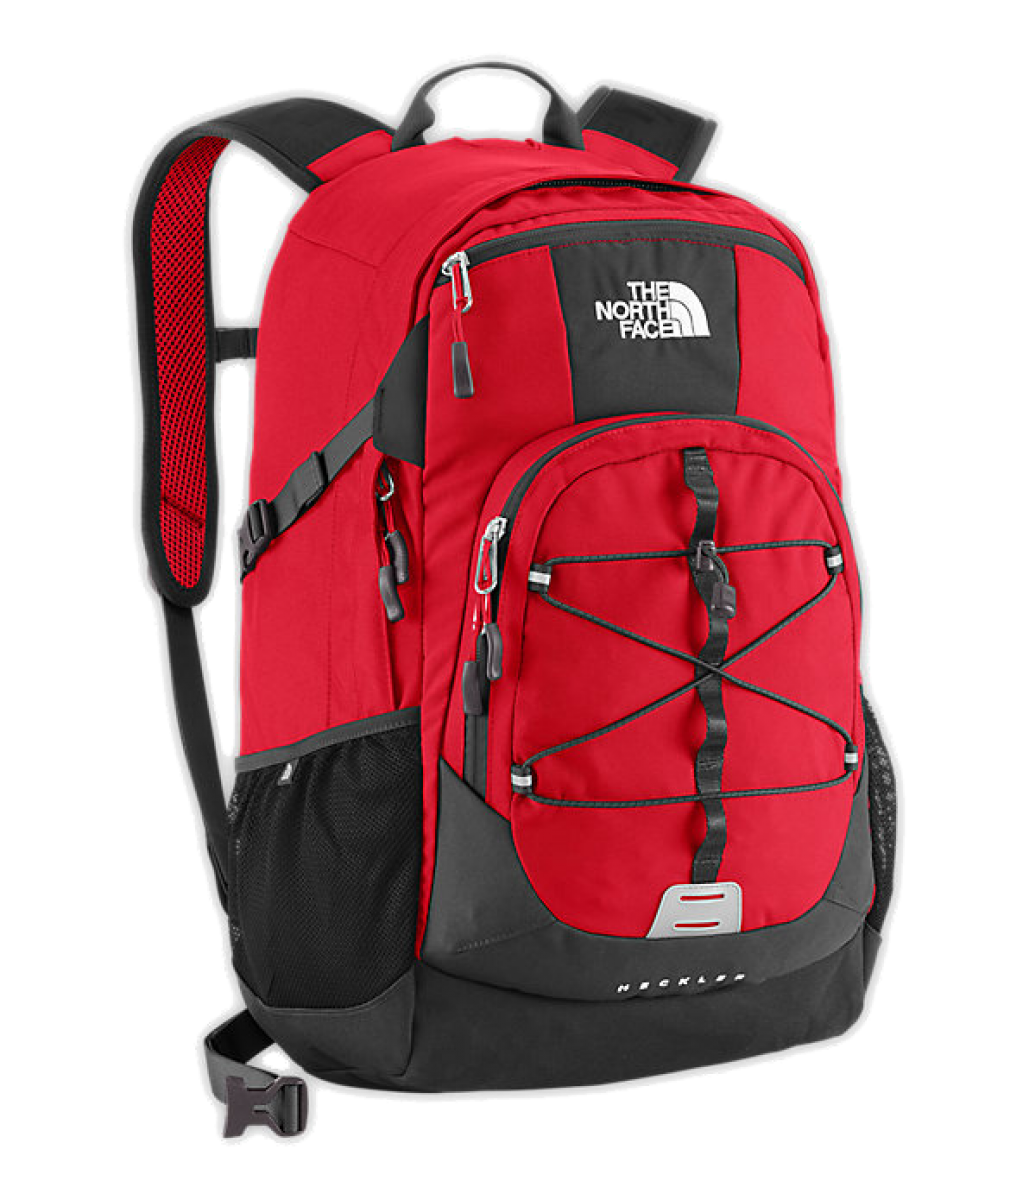 Backpack Red Sports HD Image Free PNG Image